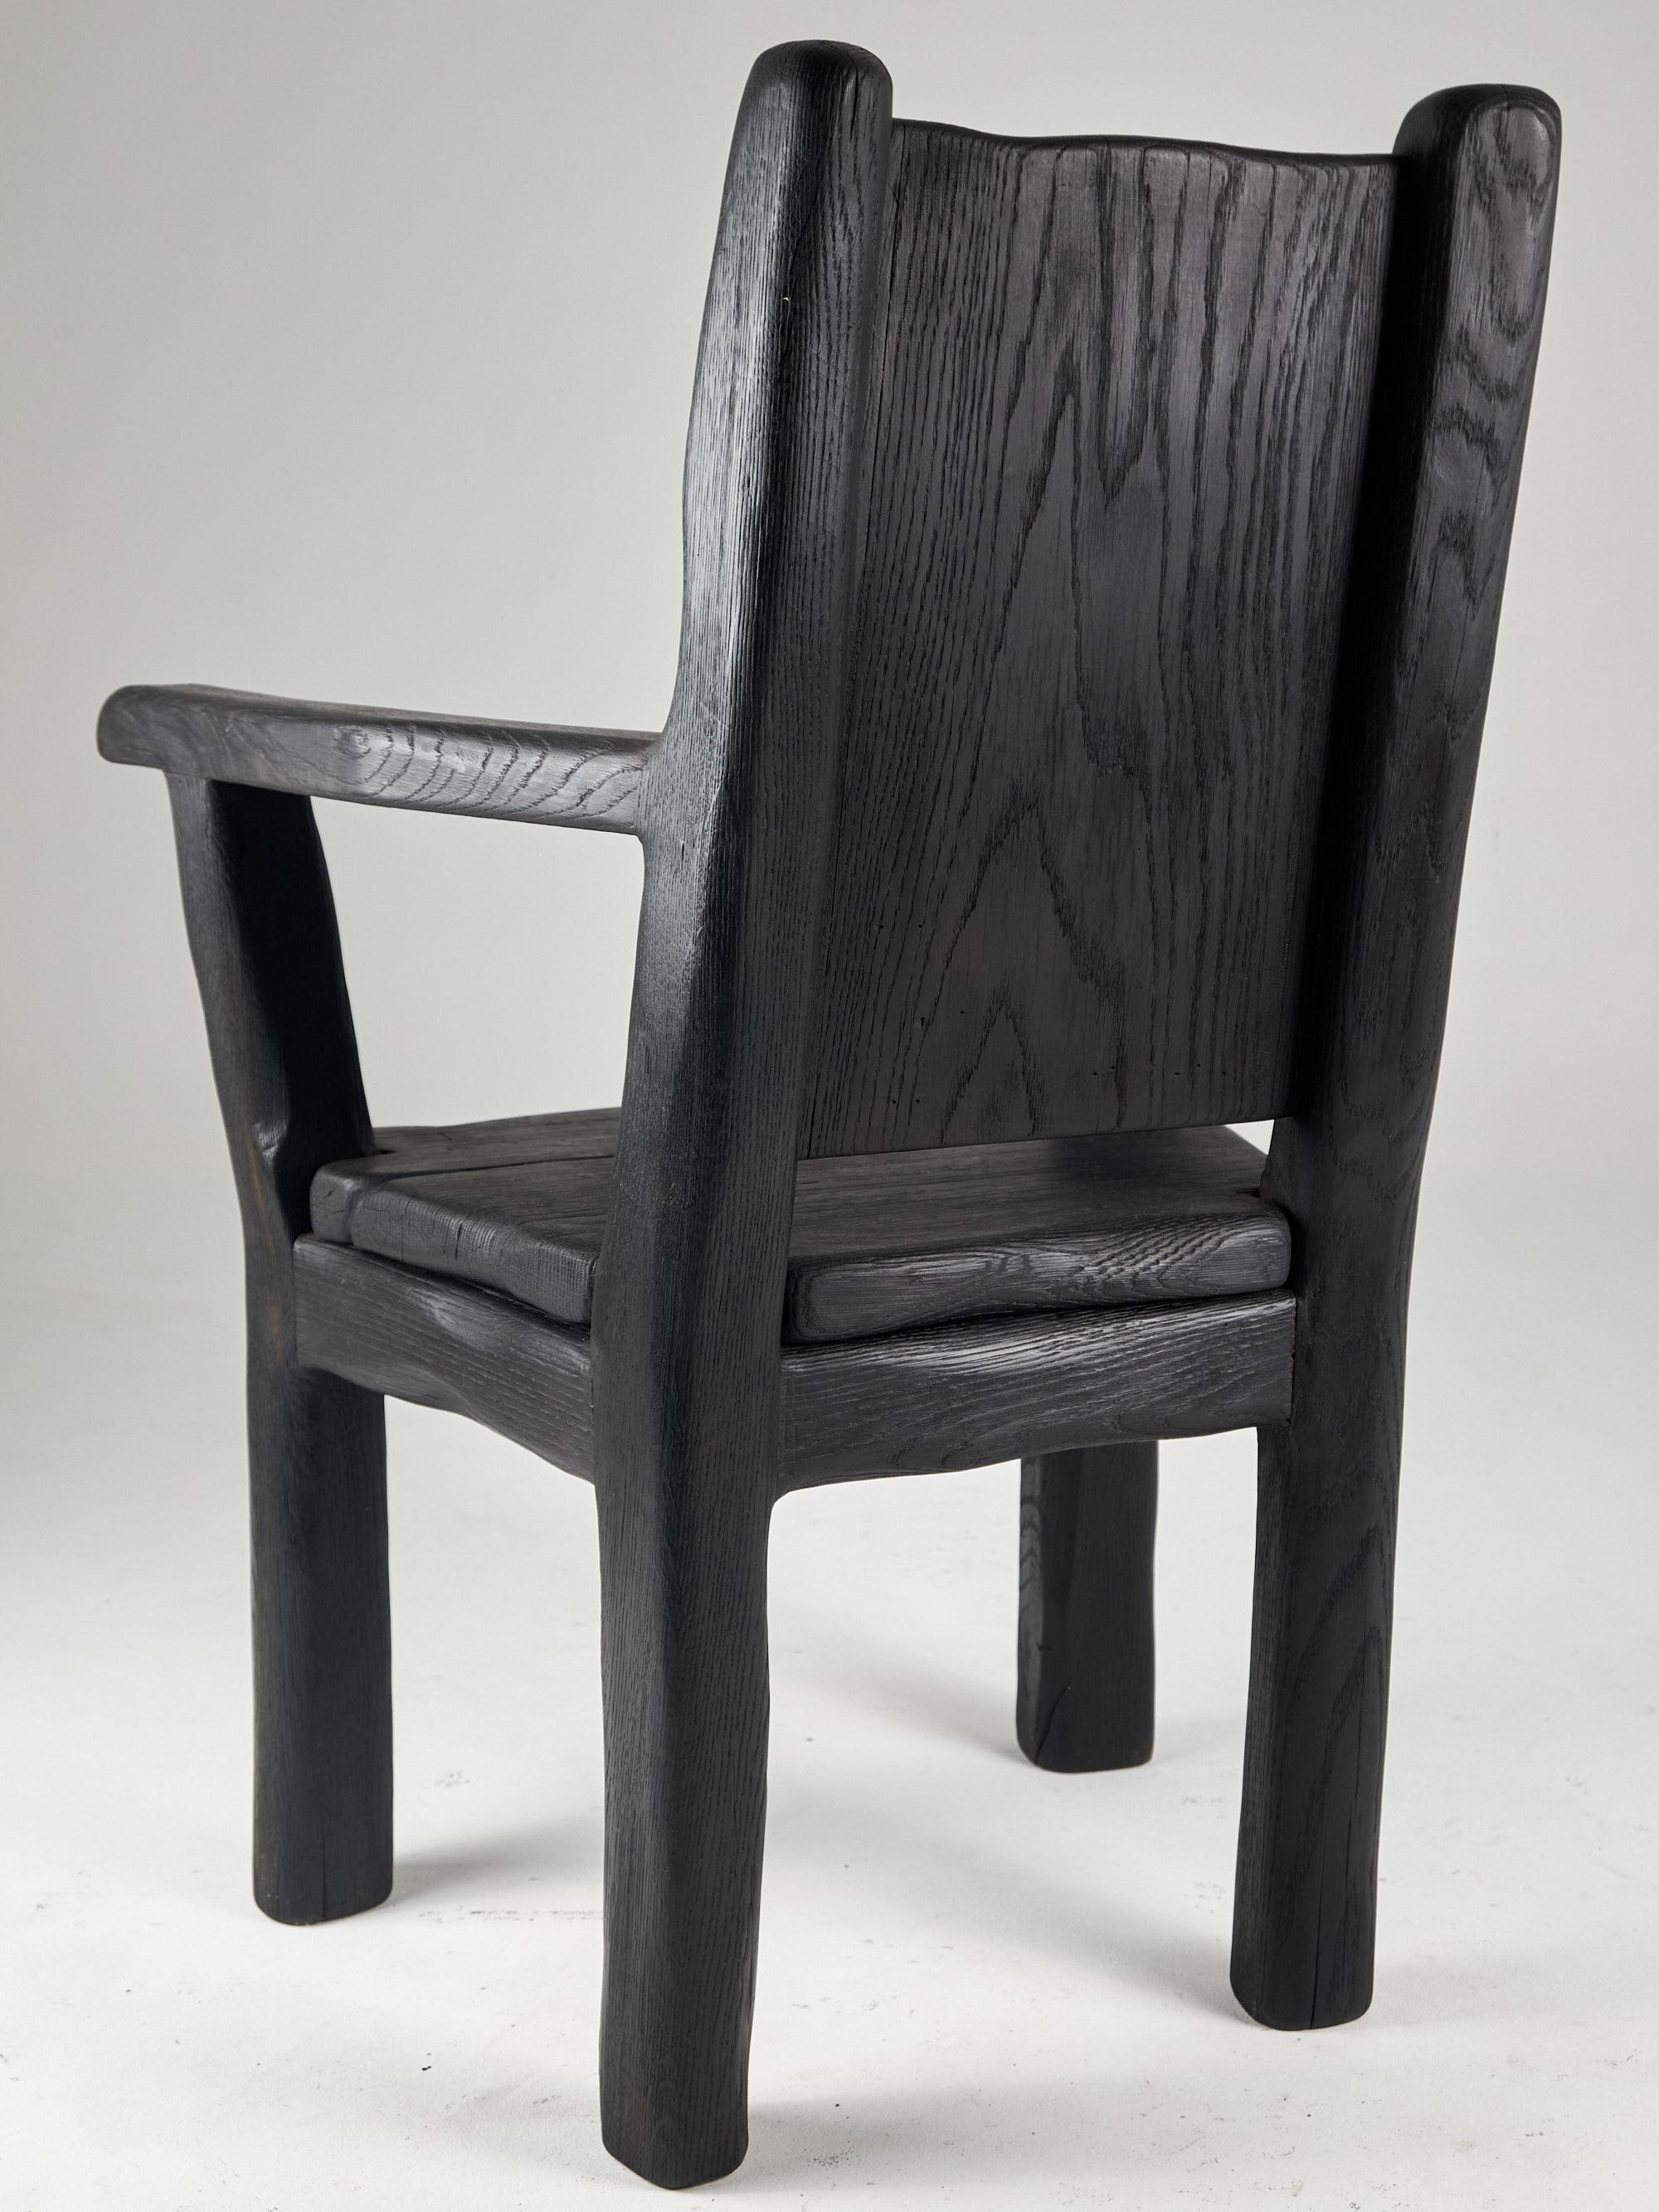 Wood Massive Oak Armchair, Rustic, Burnt Black, For Generations to Last For Sale